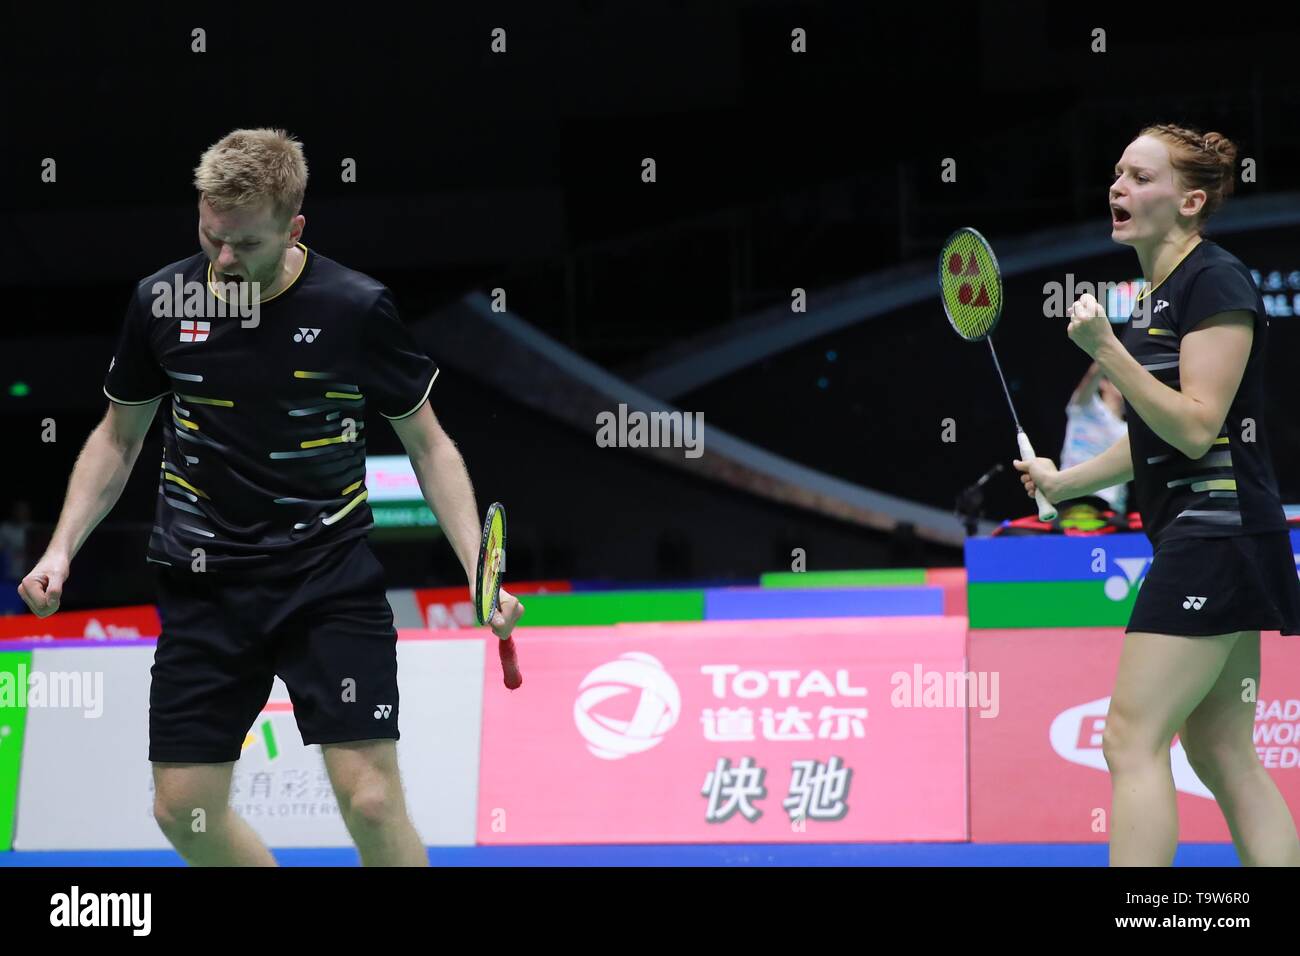 Nanning, China's Guangxi Zhuang Autonomous Region. 20th May, 2019. Marcus Ellis(L)/Lauren Smith of England react during the mixed doubles match against Mathias Christiansen/Sara Thygesen of Denmark in the group match between Denmark and England at TOTAL BWF Sudirman Cup 2019 held in Nanning, south China's Guangxi Zhuang Autonomous Region, May 20, 2019. Credit: Liu Xu/Xinhua/Alamy Live News Stock Photo